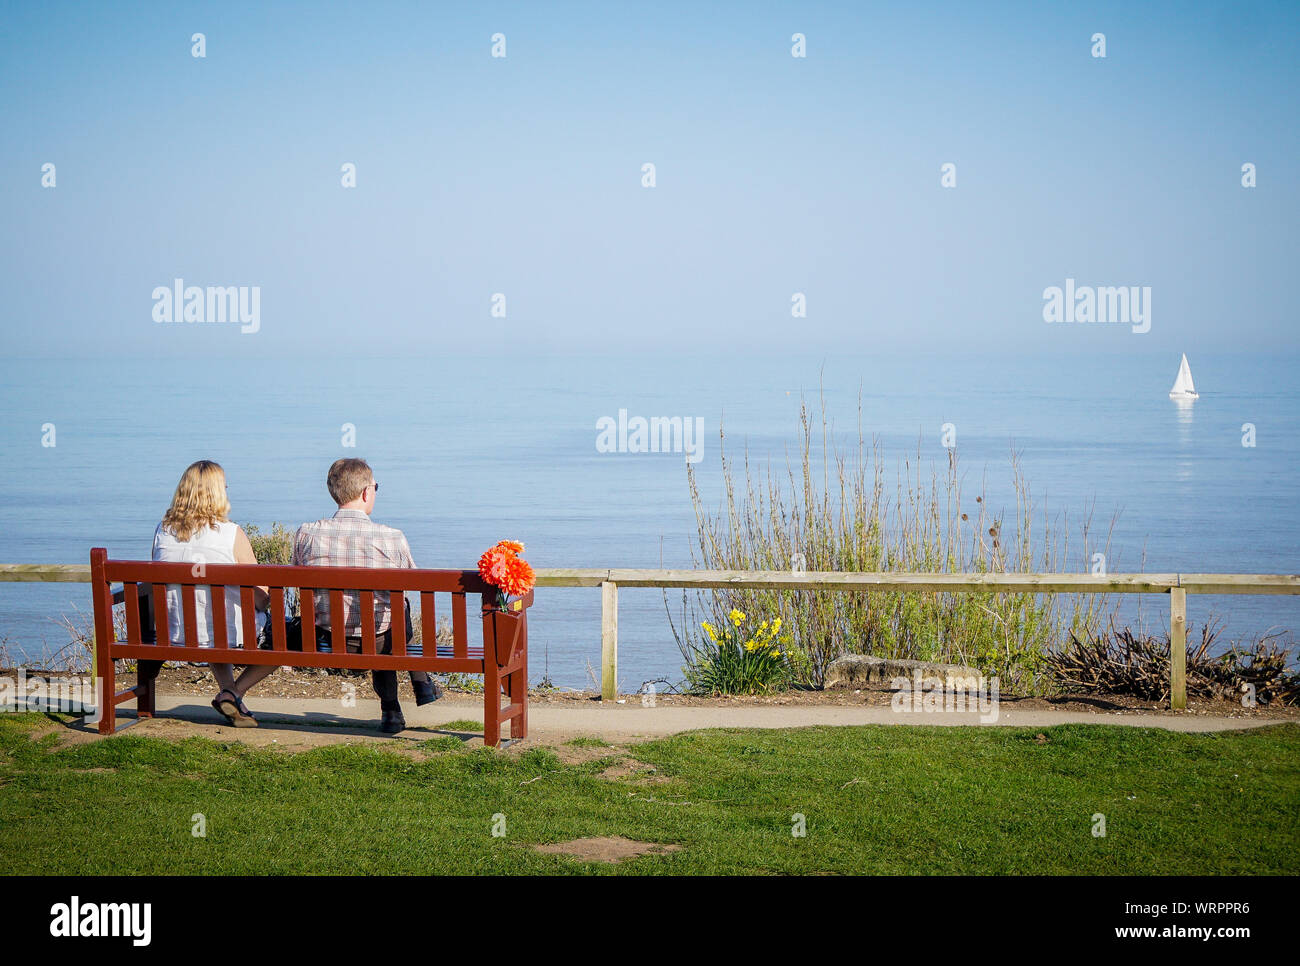 A couple sit on a bench as they see a sailboat is passing on the beach of Bridlington (Photo by Ioannis Alexopoulos / Alamy) Stock Photo